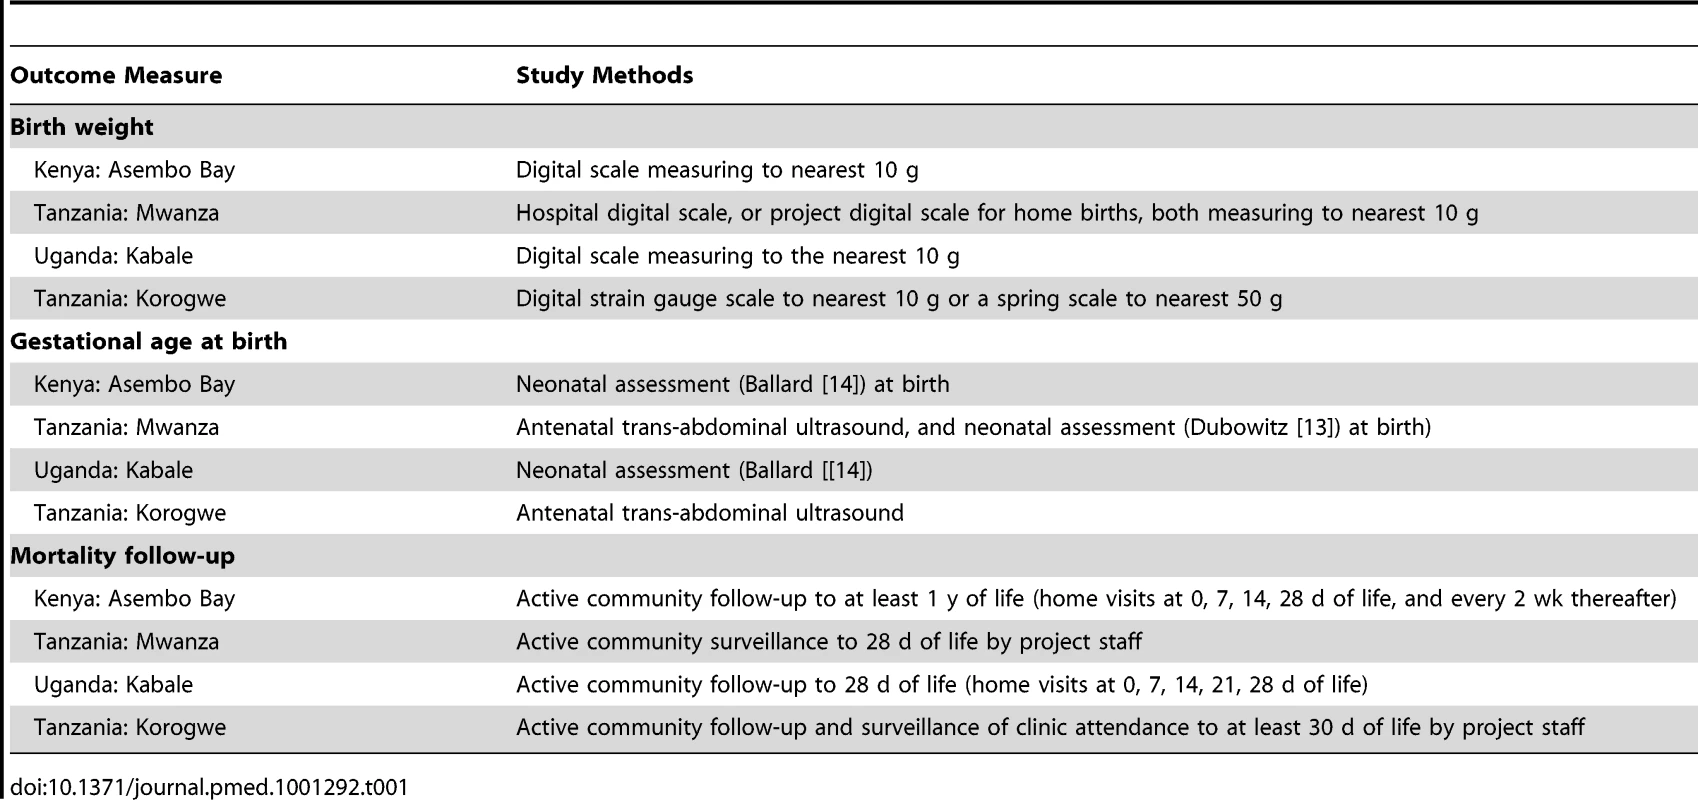 Study methods for measurement of newborn outcomes (birth weight, gestational age at birth. and mortality follow-up).